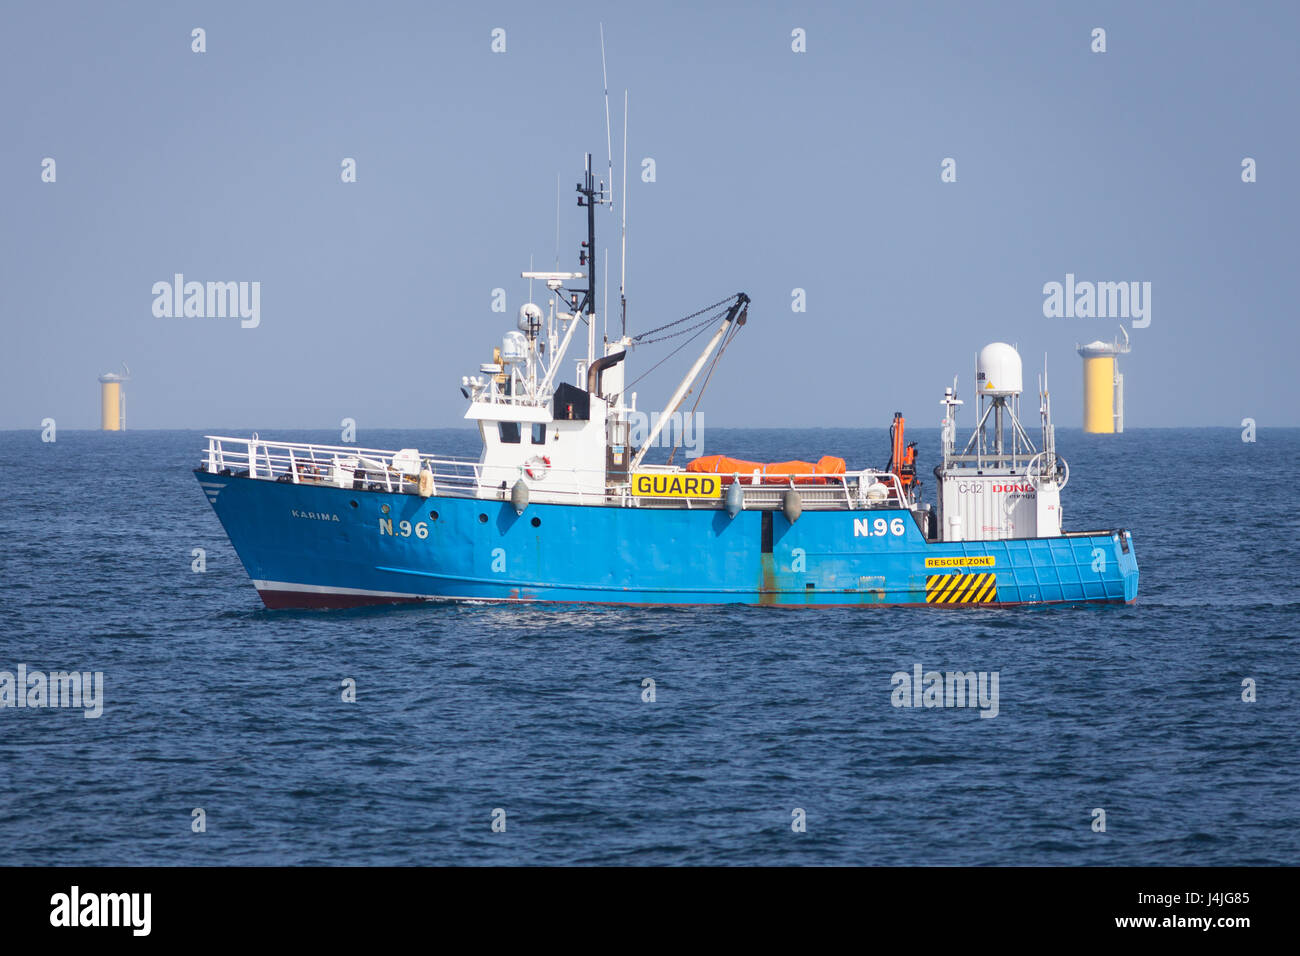 Guard vessel, Karima, on the Walney Extension Offshore Wind Farm construction project Stock Photo